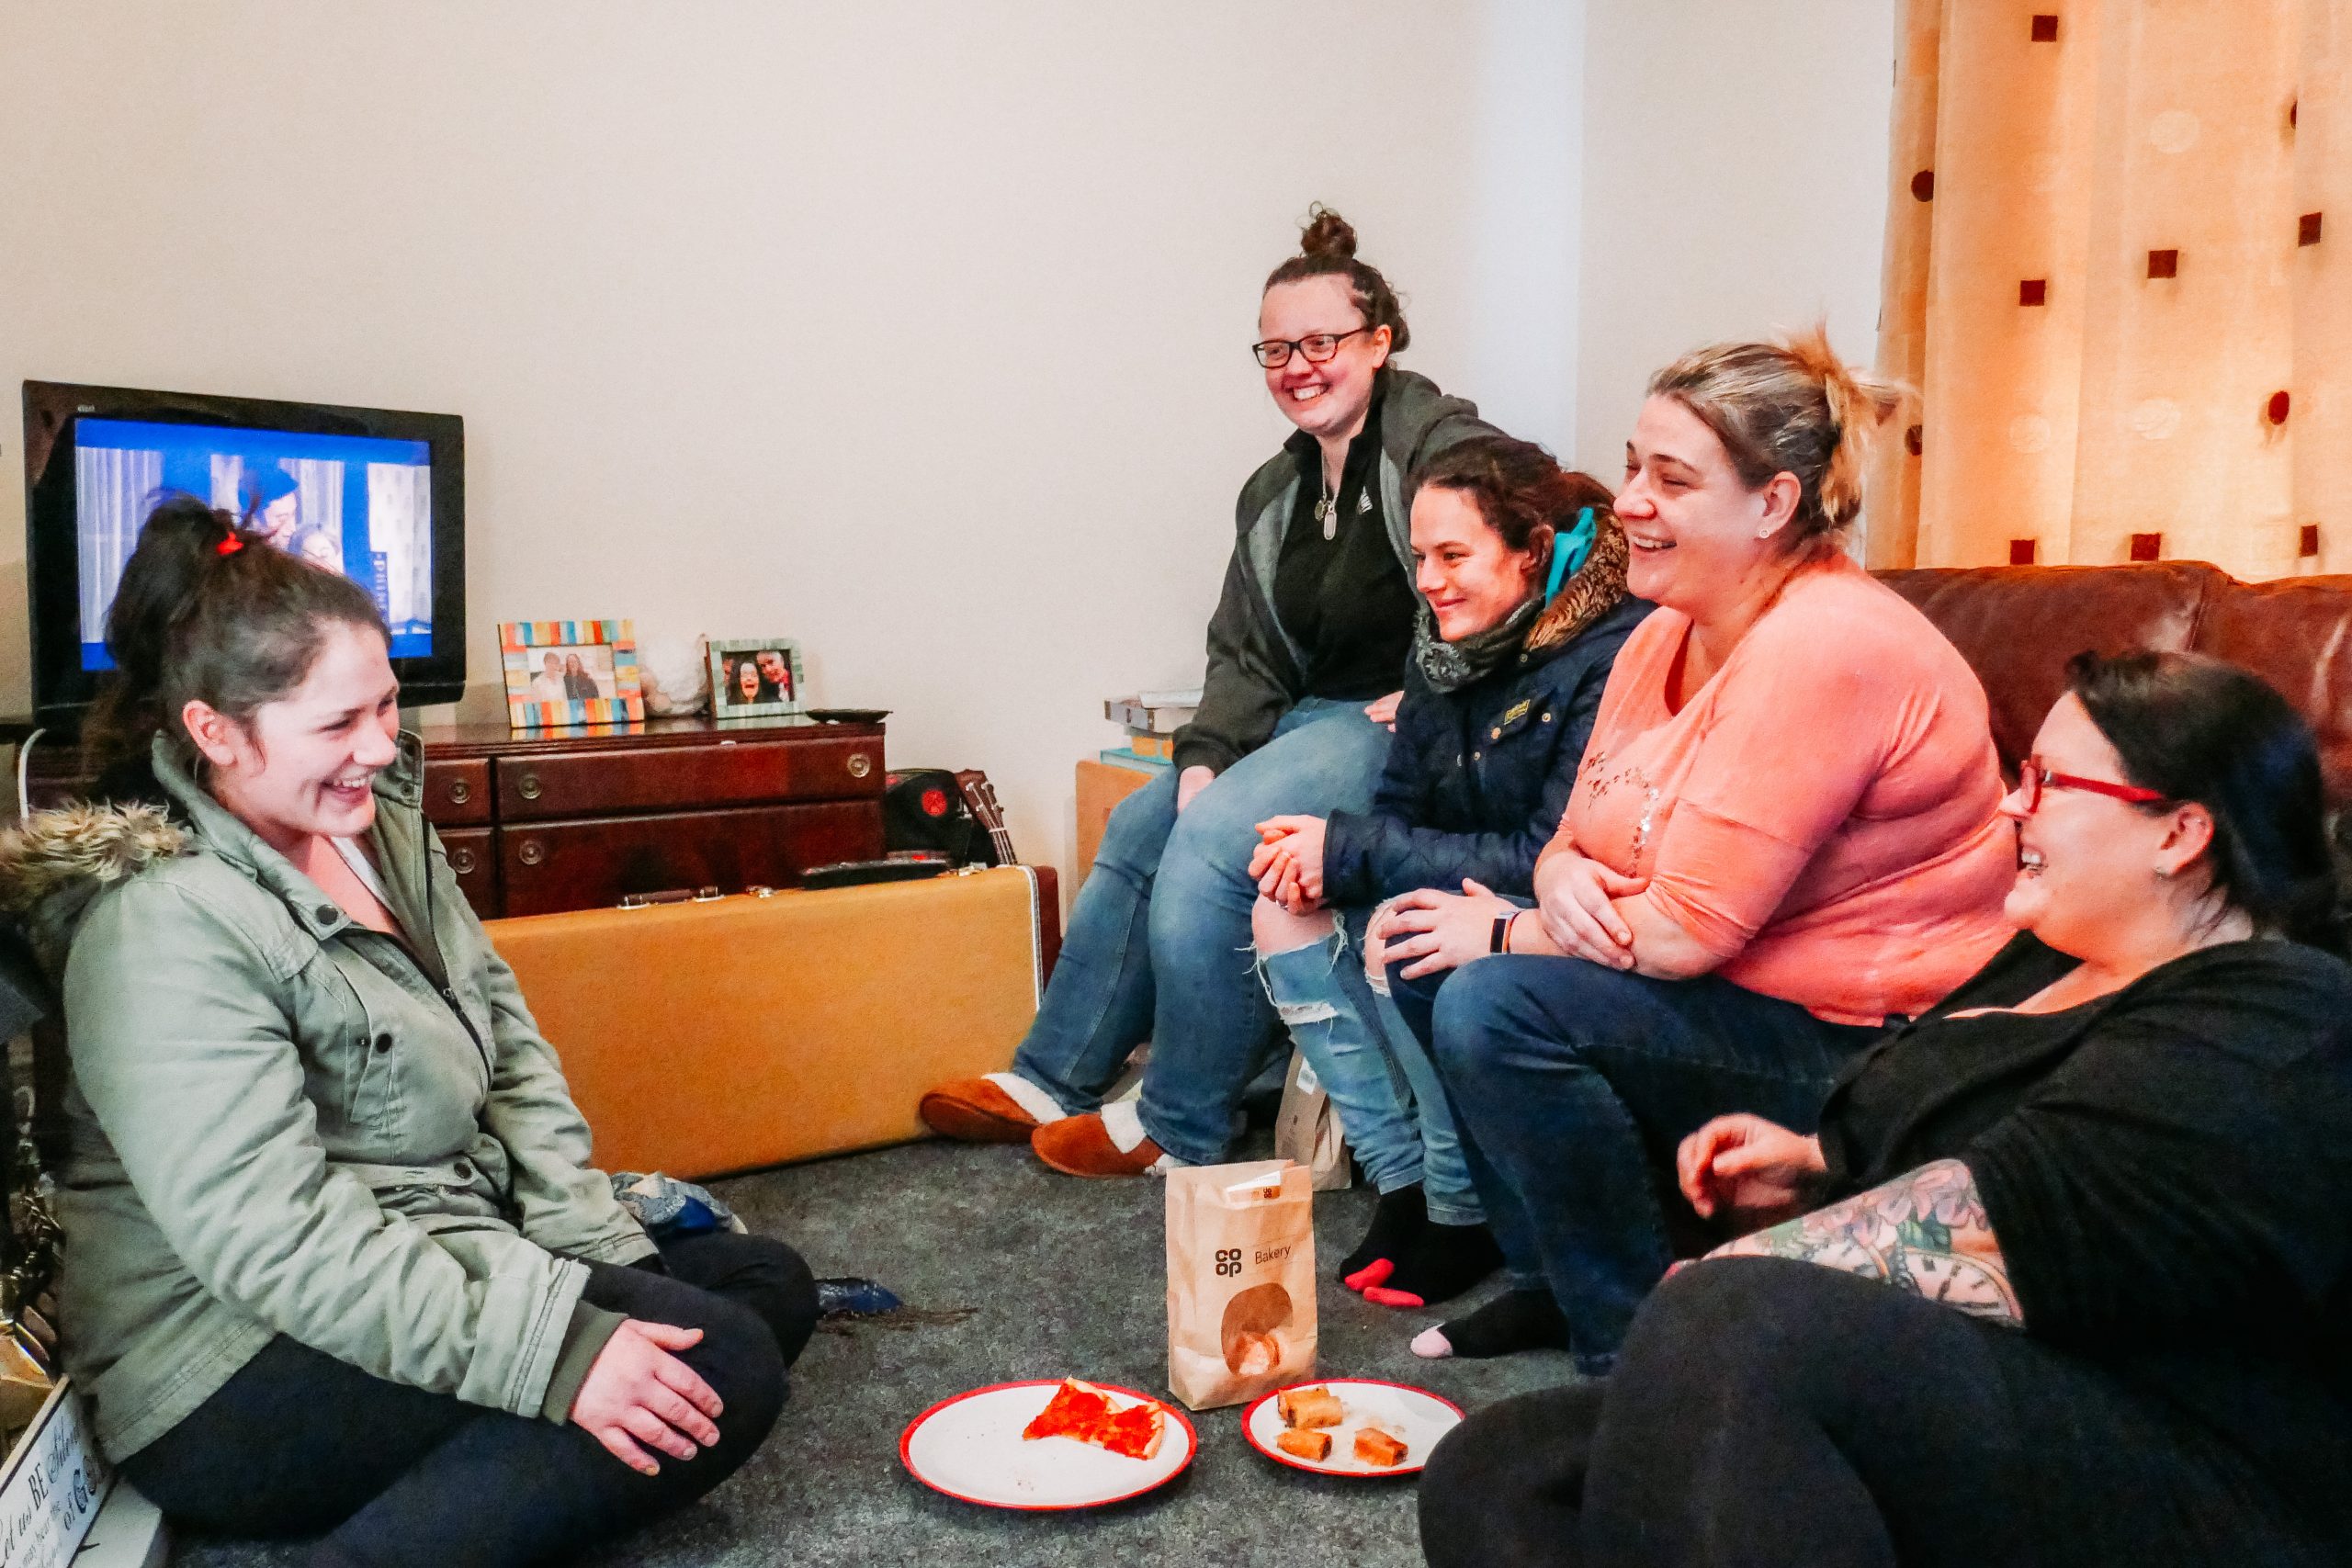 Amy and other women in a living room laughing and eating biscuits